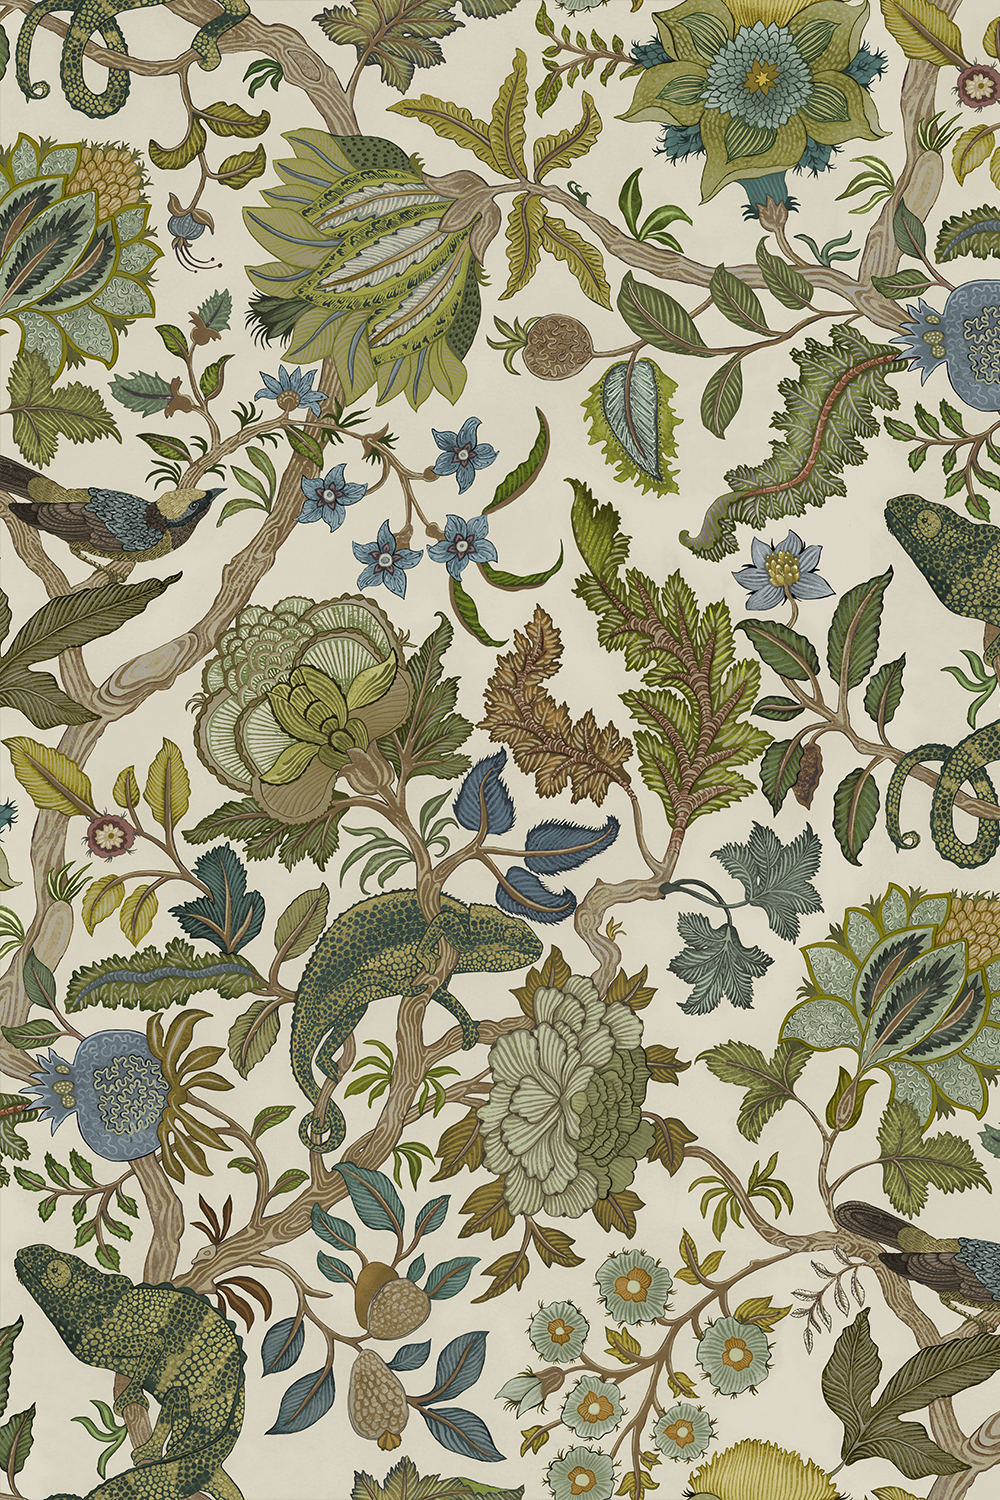 Chameleon Trail Wallpaper - Sage and Green